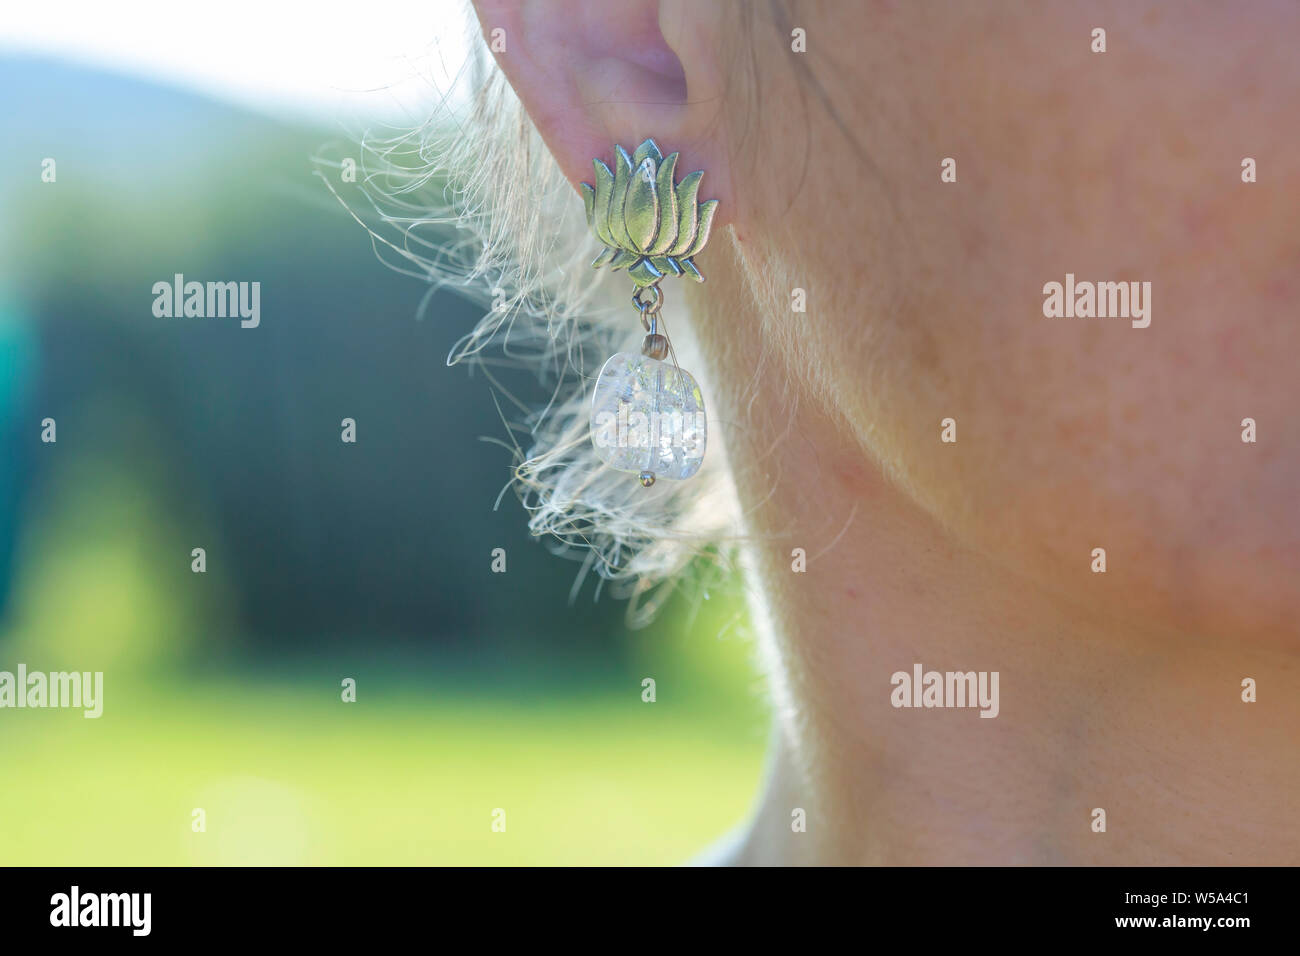 Woman outdoor portant beau style Boho earring Banque D'Images